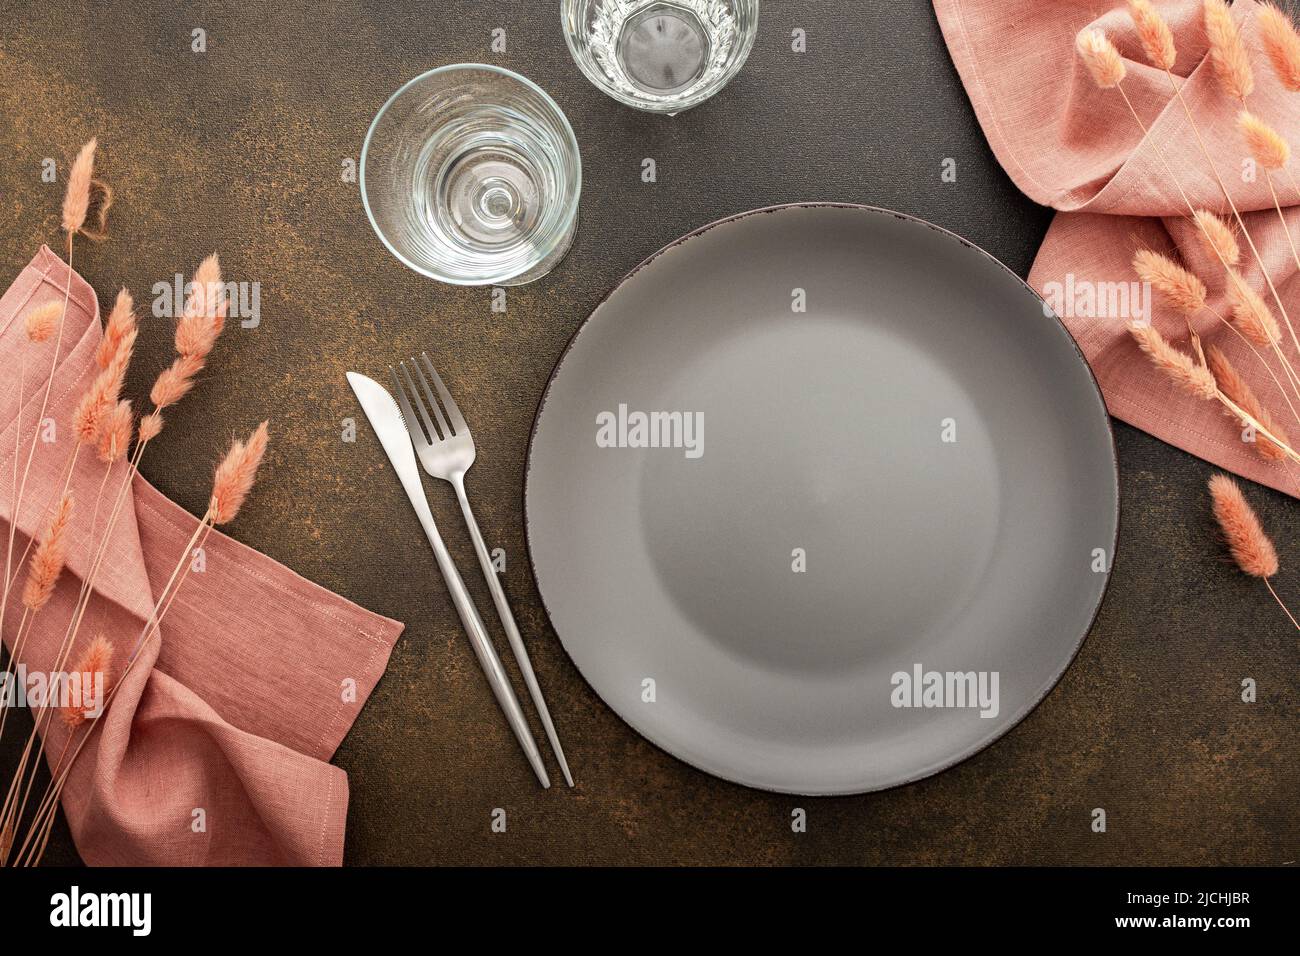 Table setting, empty gray plate with napkin and cutlery on a brown background, top view of the served table decorated with dry flowers Stock Photo